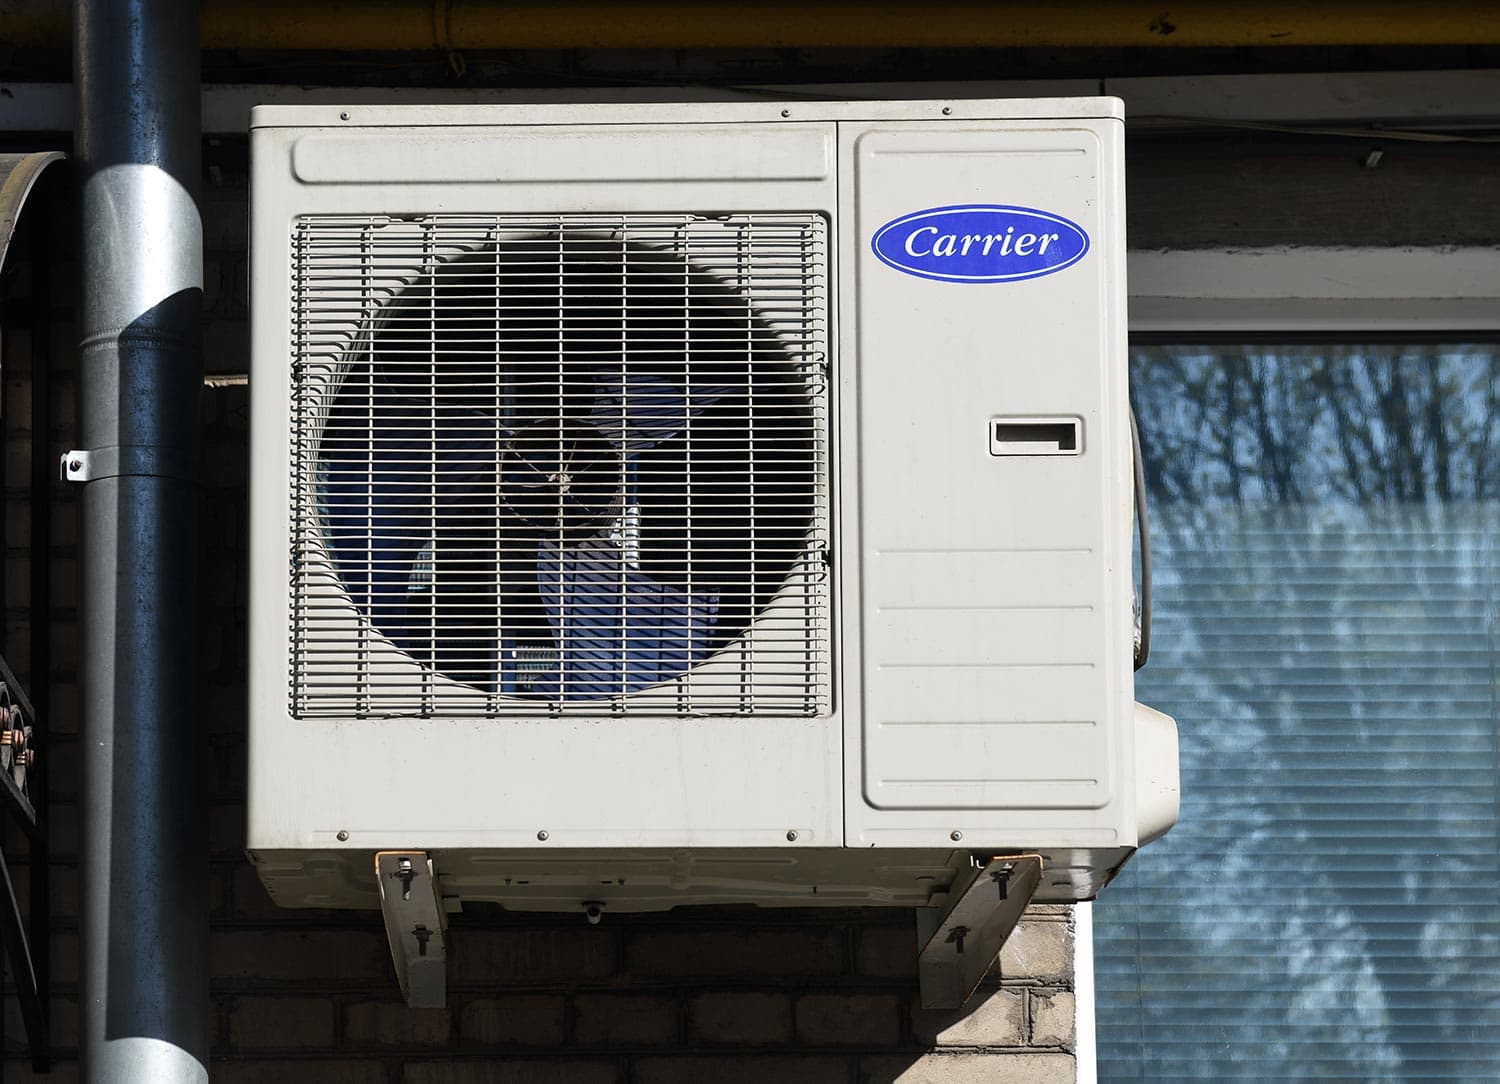 Carrier air conditioner outside the building